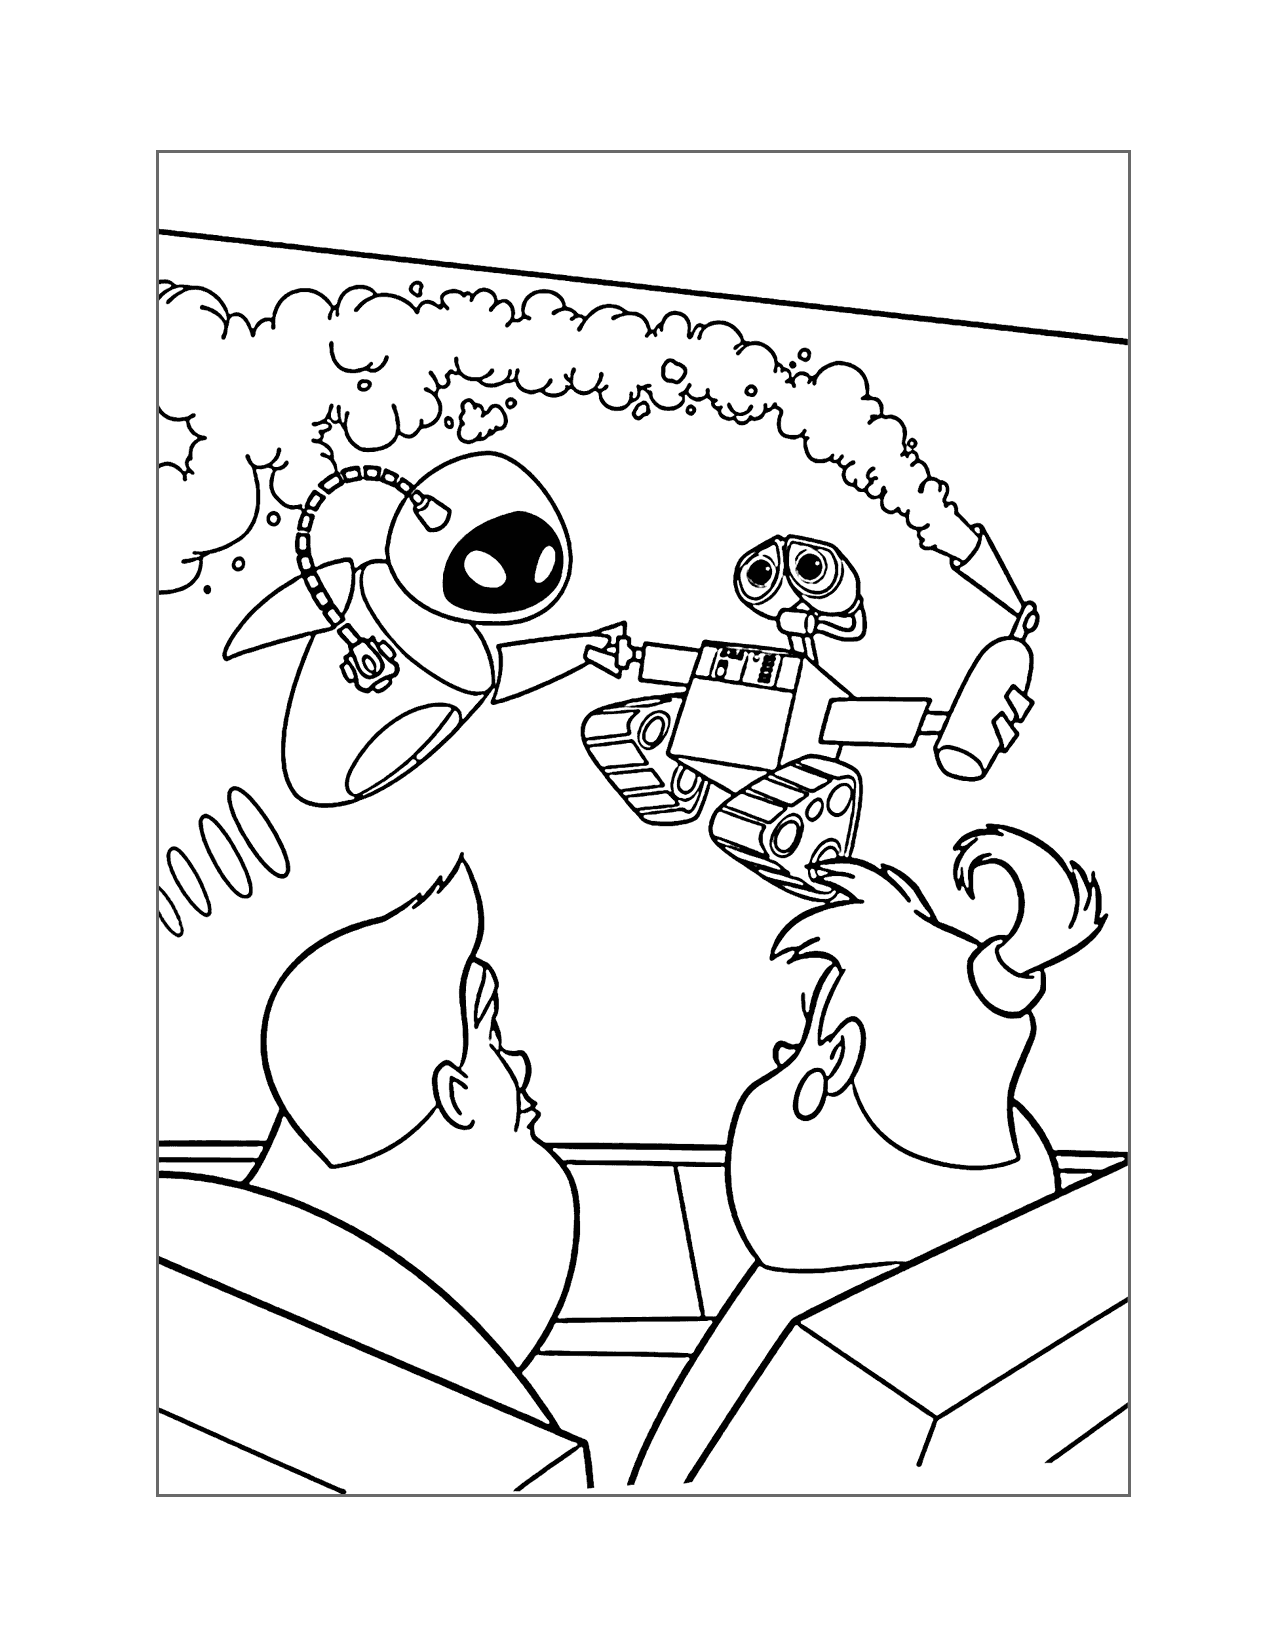 Wall E And Eve In Space Coloring Page